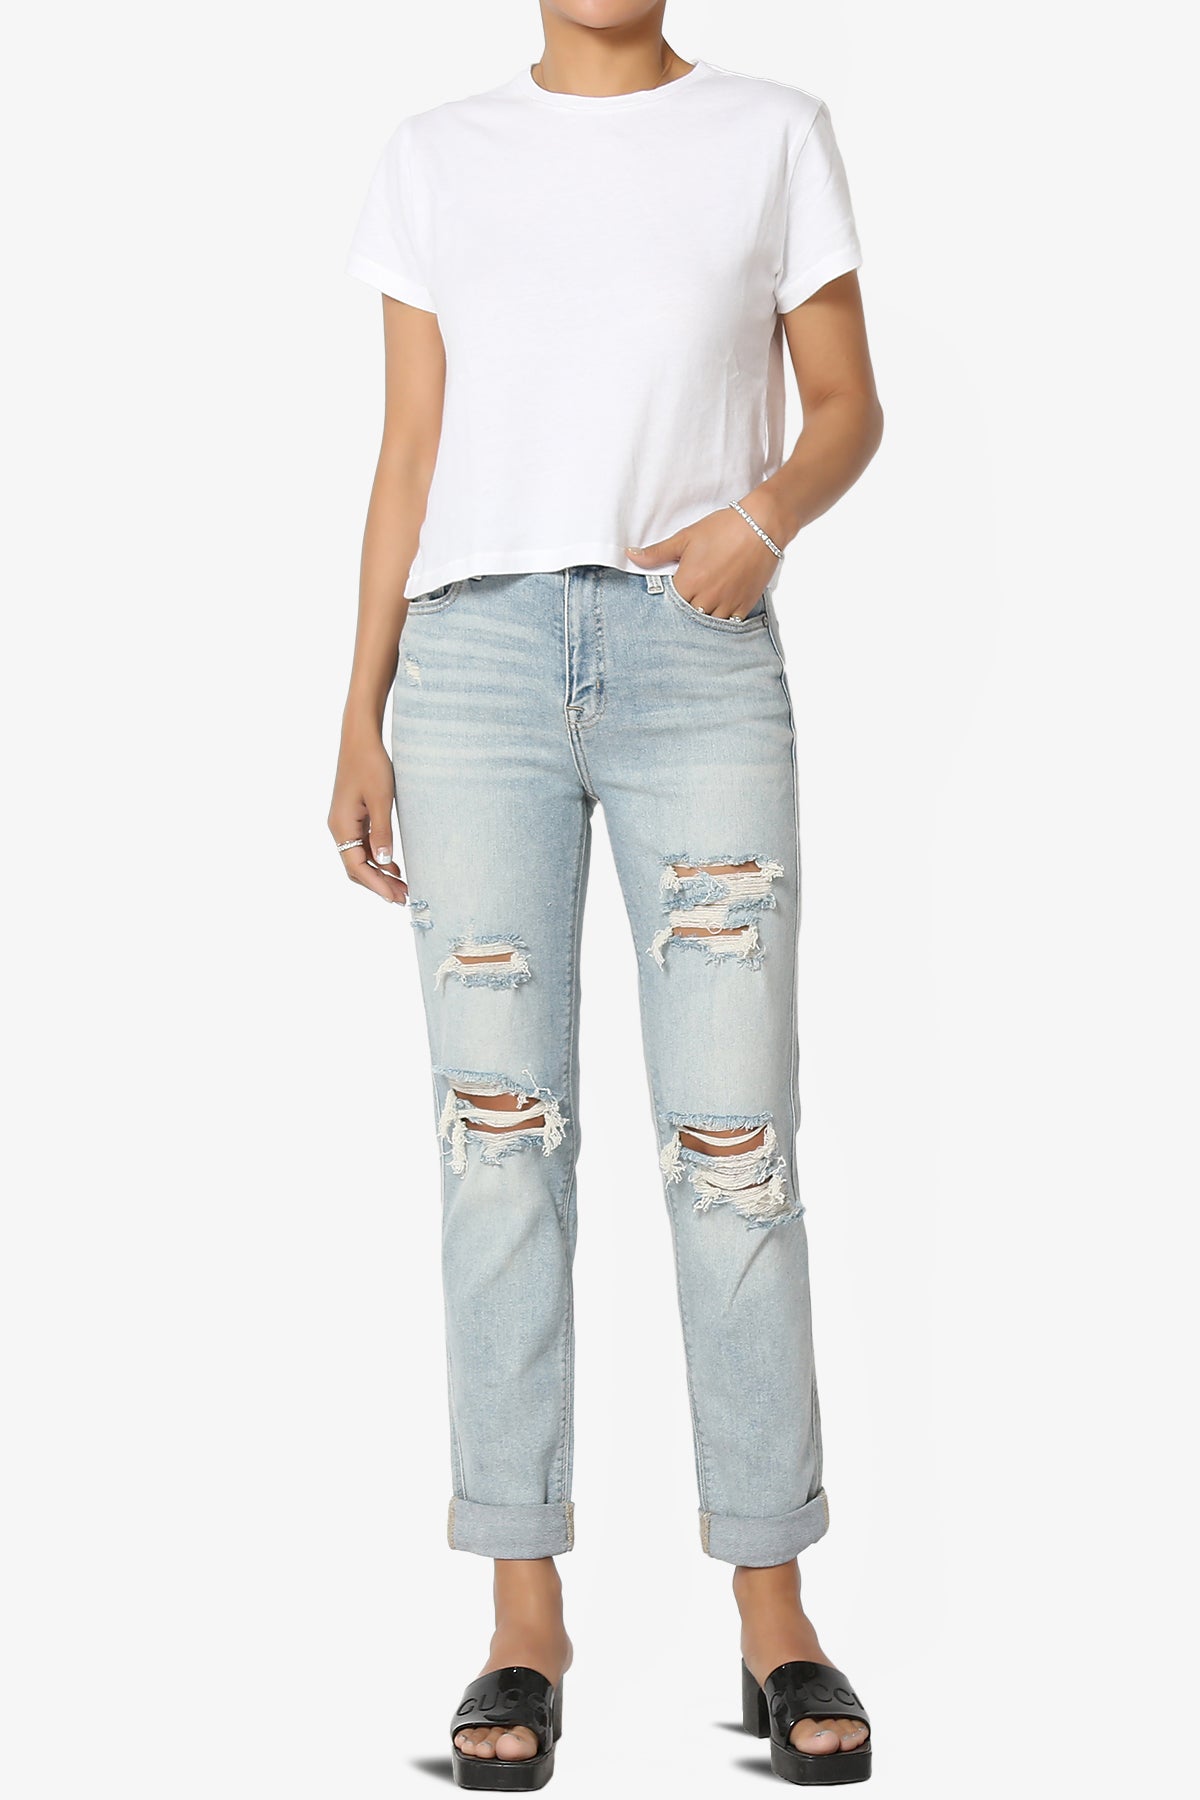 Rocky High Rise Distressed Boyfriend Jeans in ICMP LIGHT_6